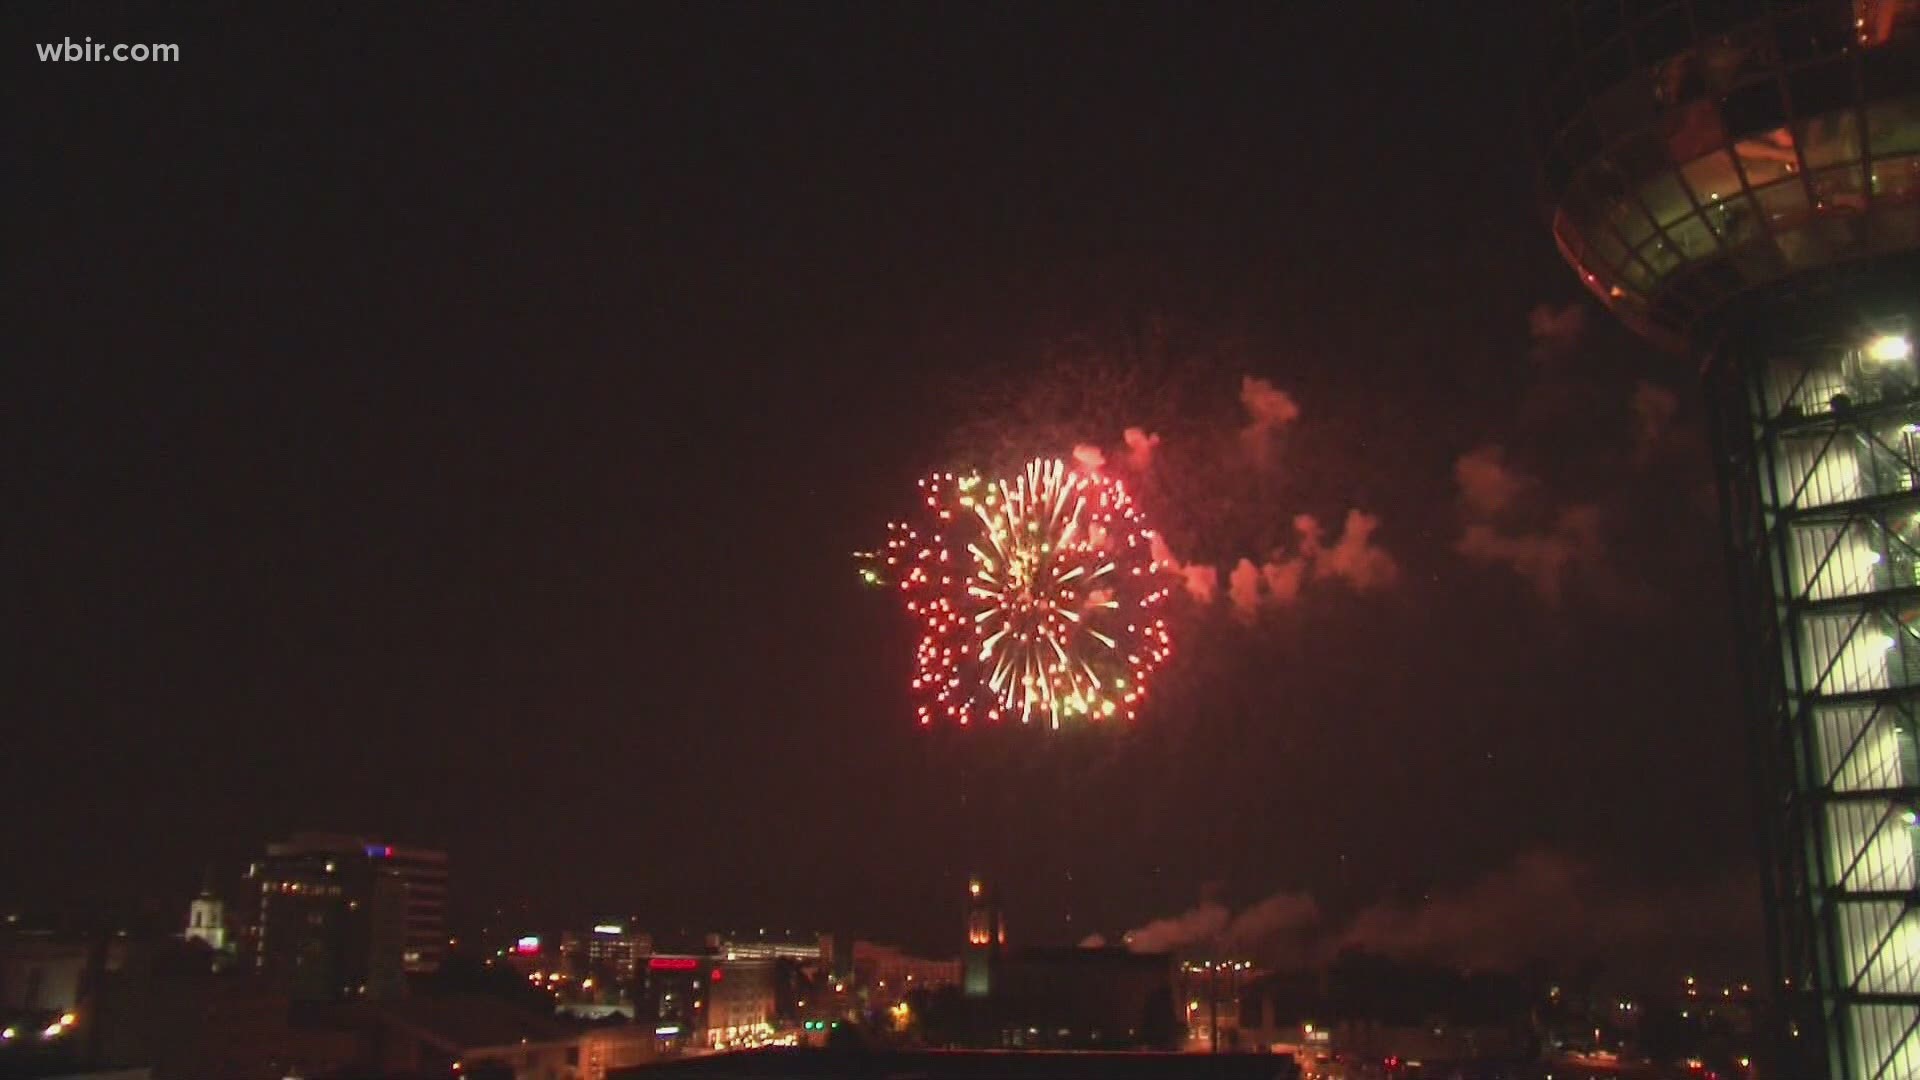 After many events were canceled last year due to the pandemic, more celebrations are being planned for the Fourth of July throughout East Tennessee.